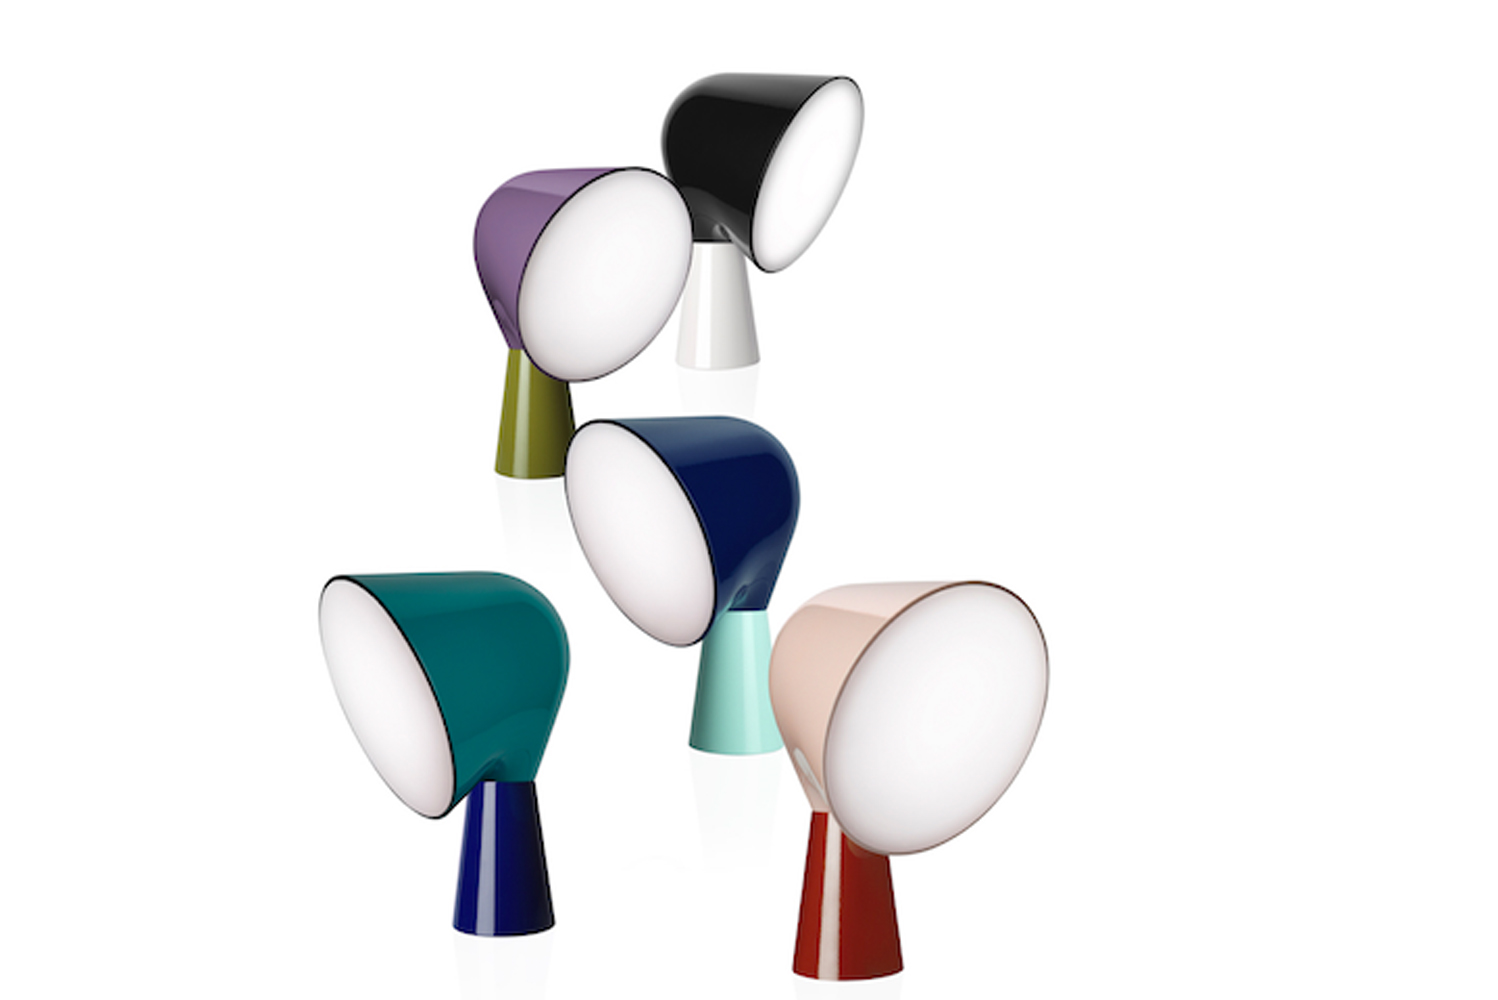 Introducing a new lighting collection from Foscarini 